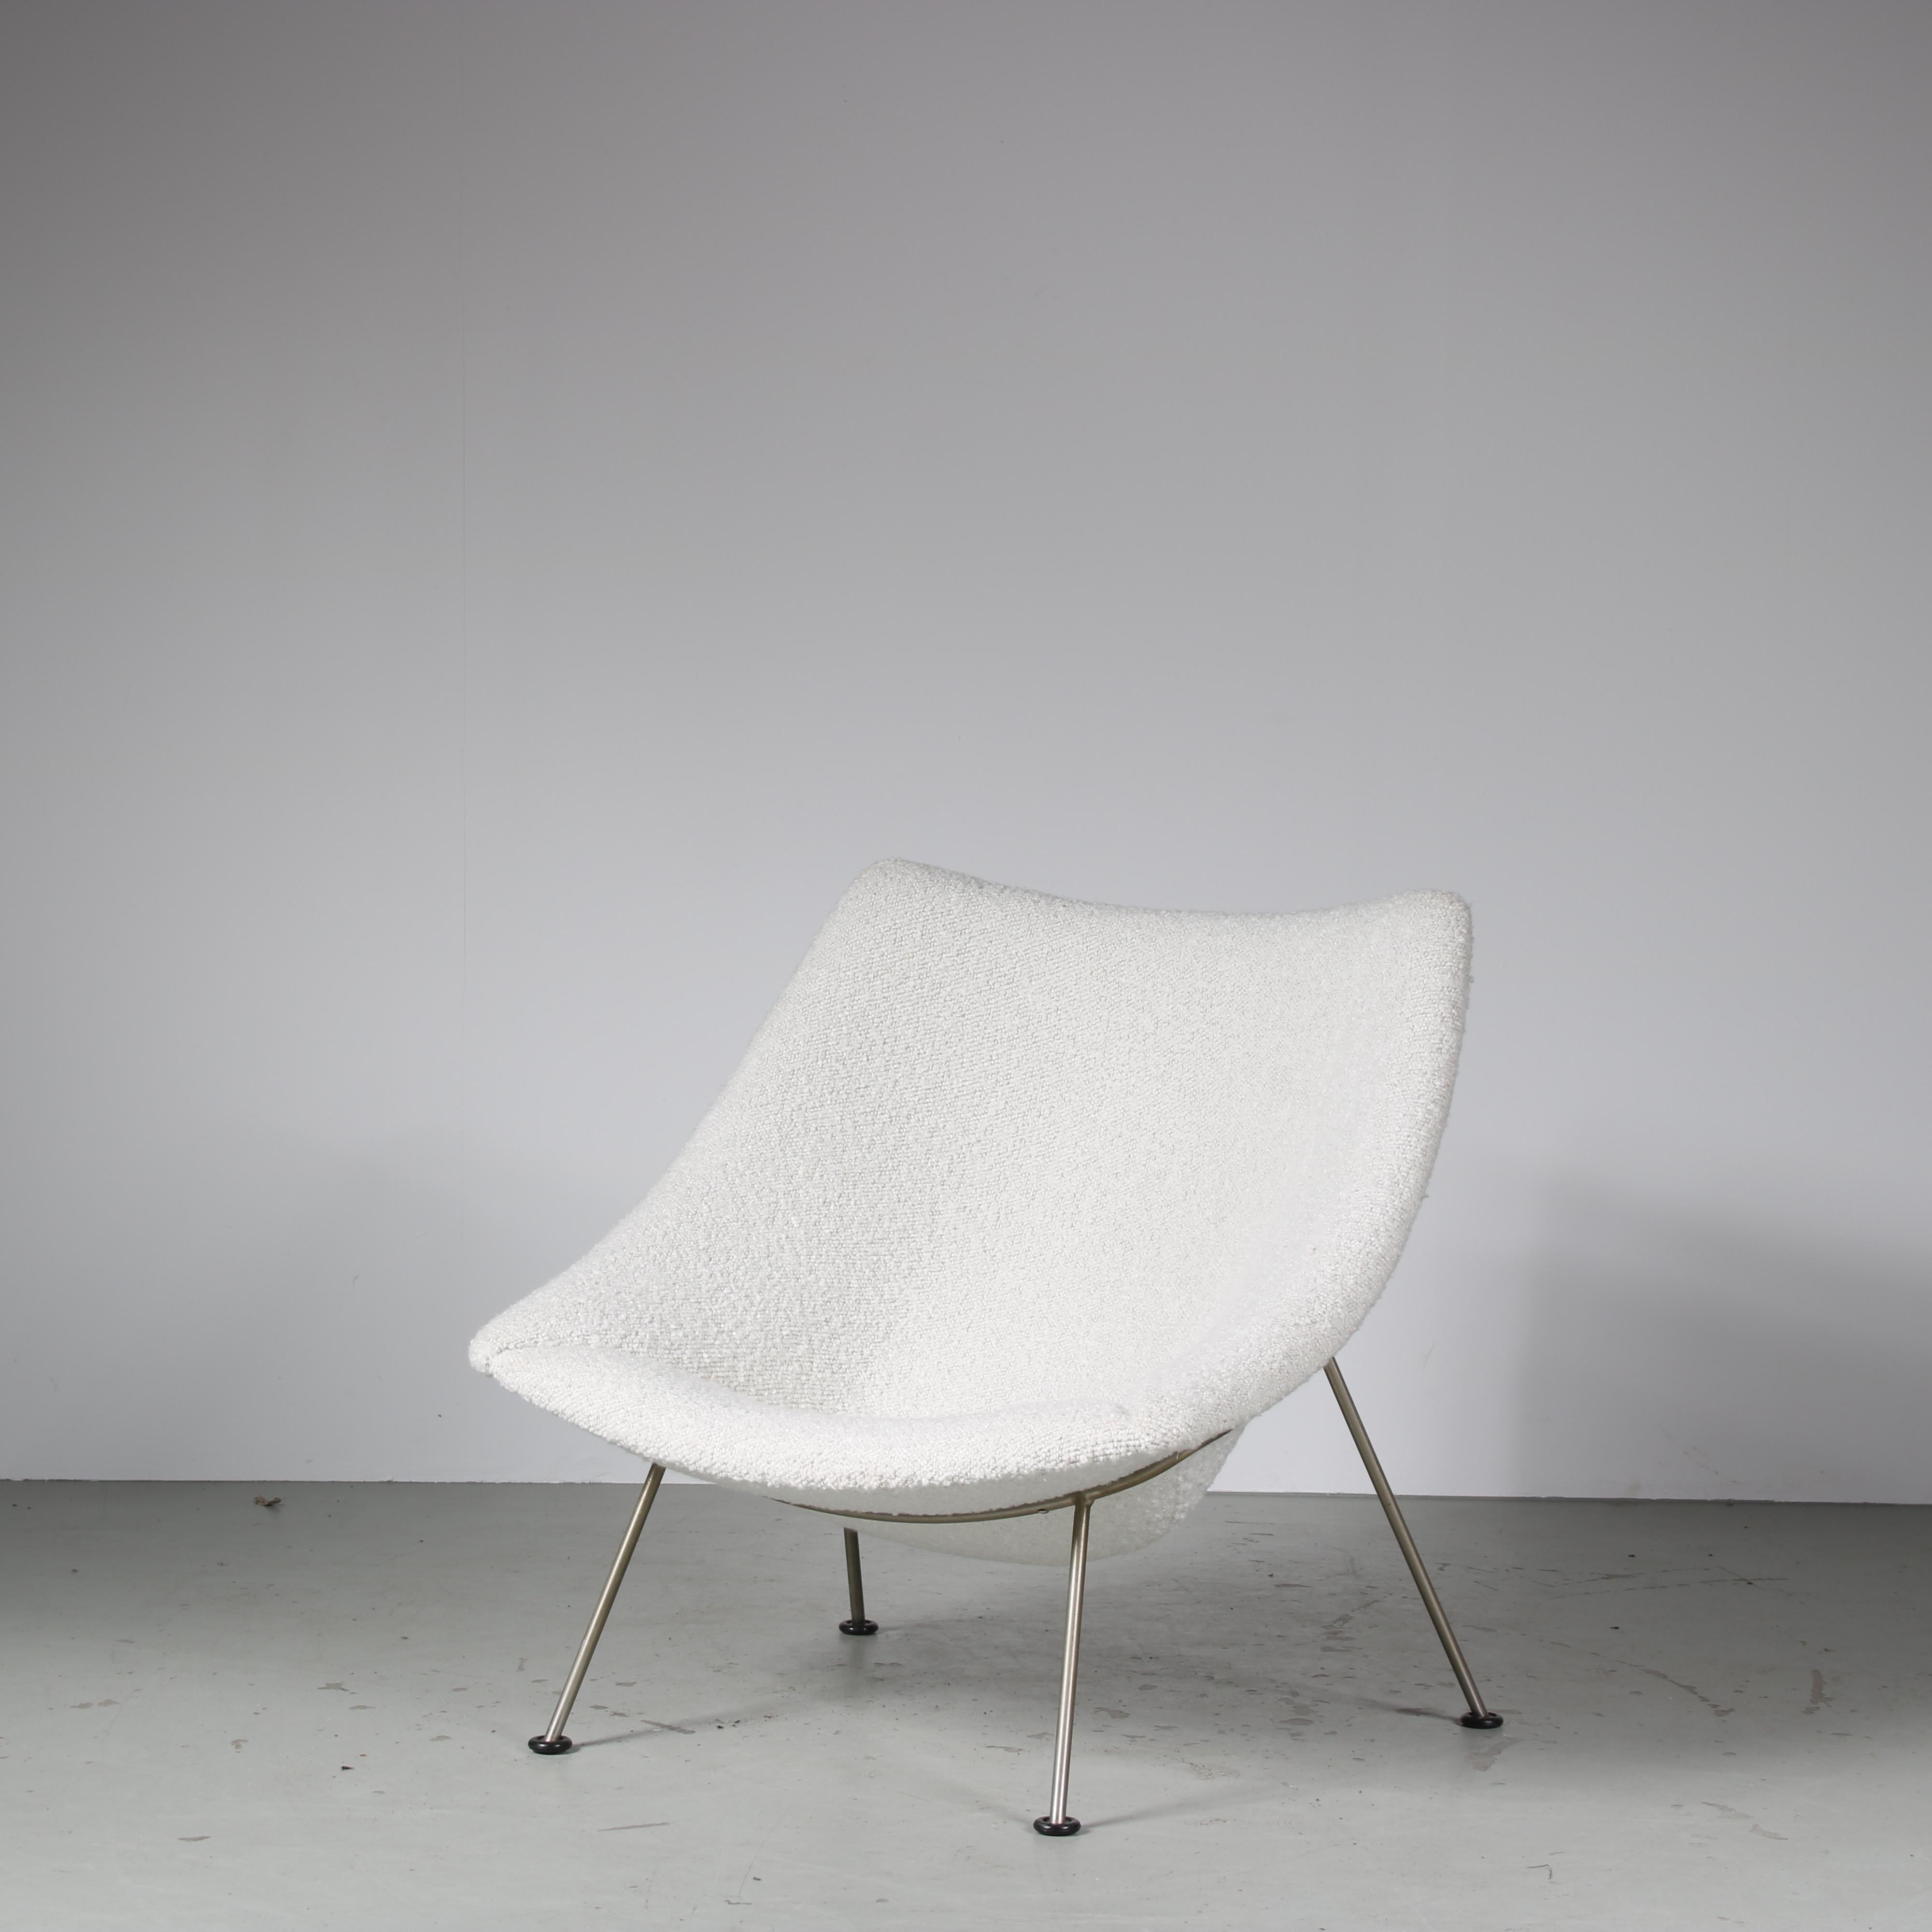 This eye-catching lounge chair, model “Oyster”, is an iconic piece designed by Pierre Paulin for Artifort in the Netherlands around 1960.

It has a very inviting appearance: the seat is a big shell with a slightly tilted seat for maximum seating